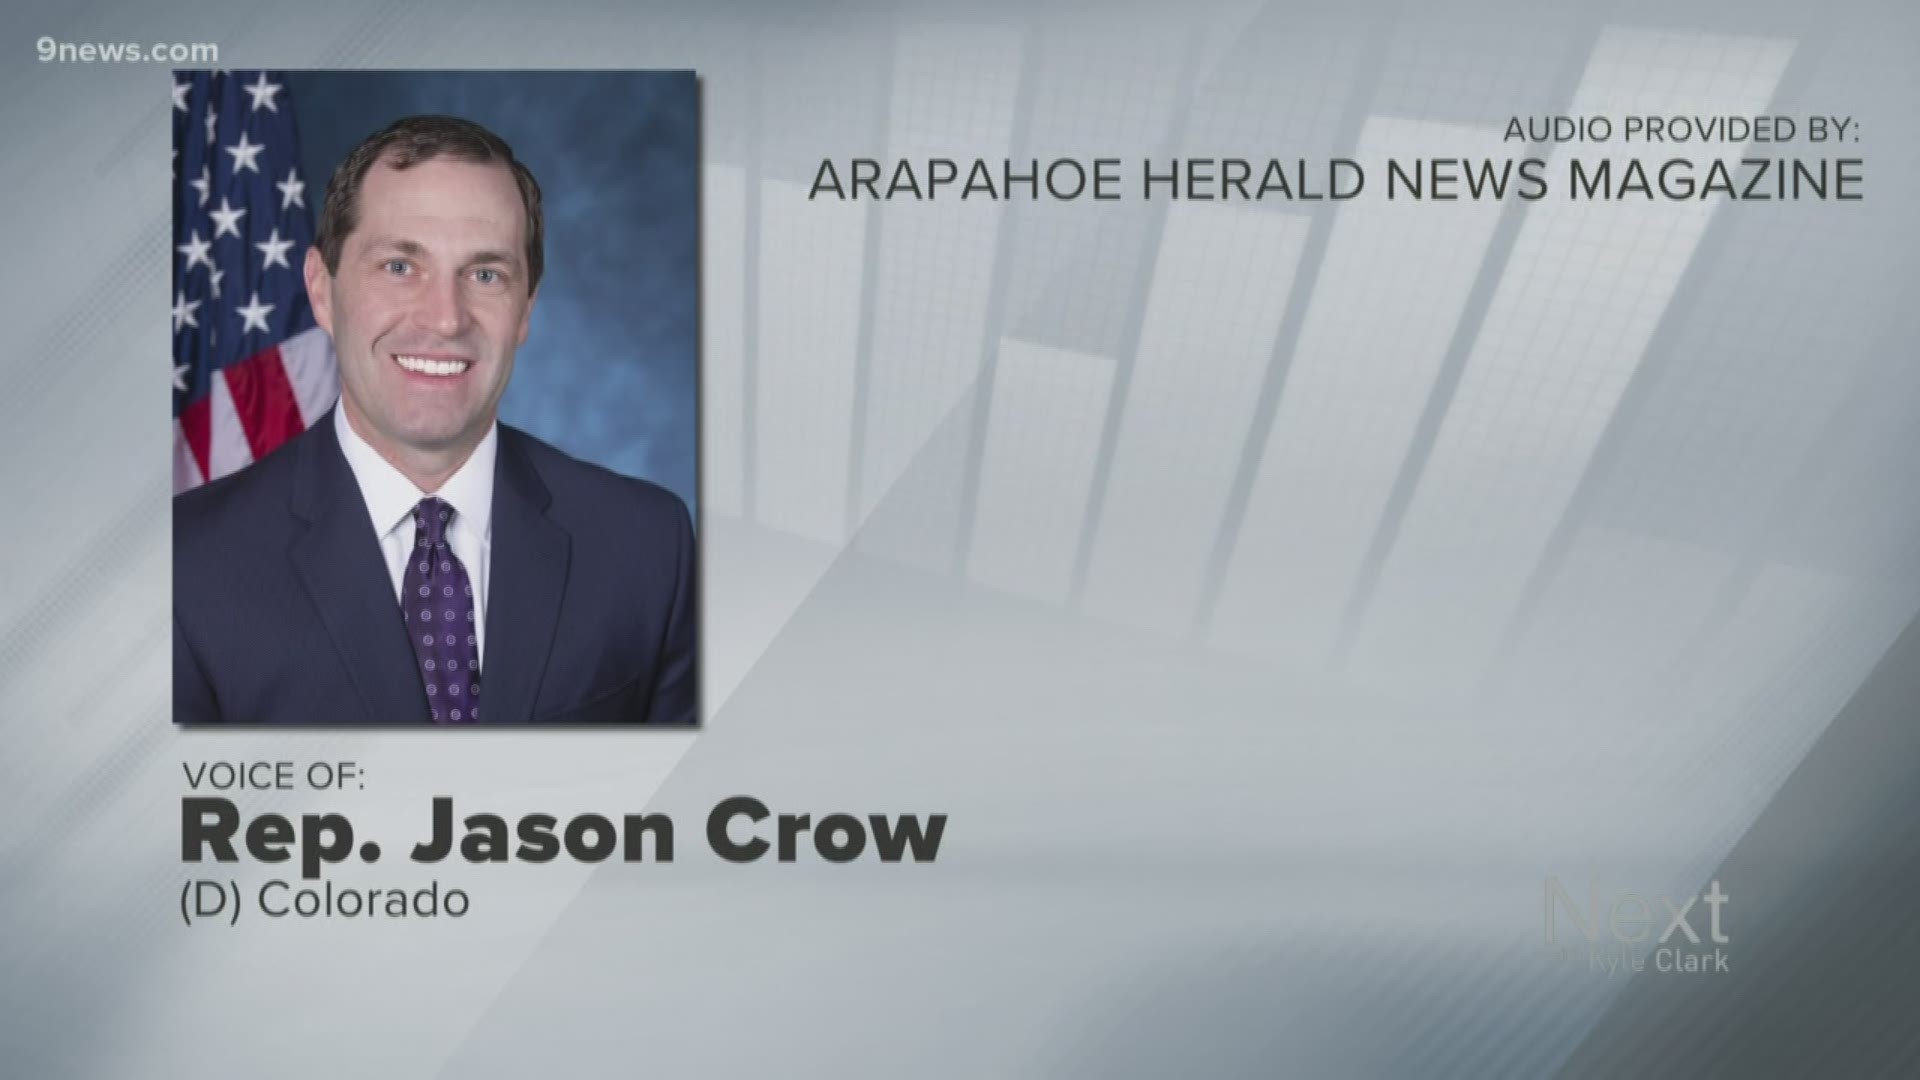 Democratic Congressman Jason Crow of Aurora has received his first national spotlight as an impeachment manager.